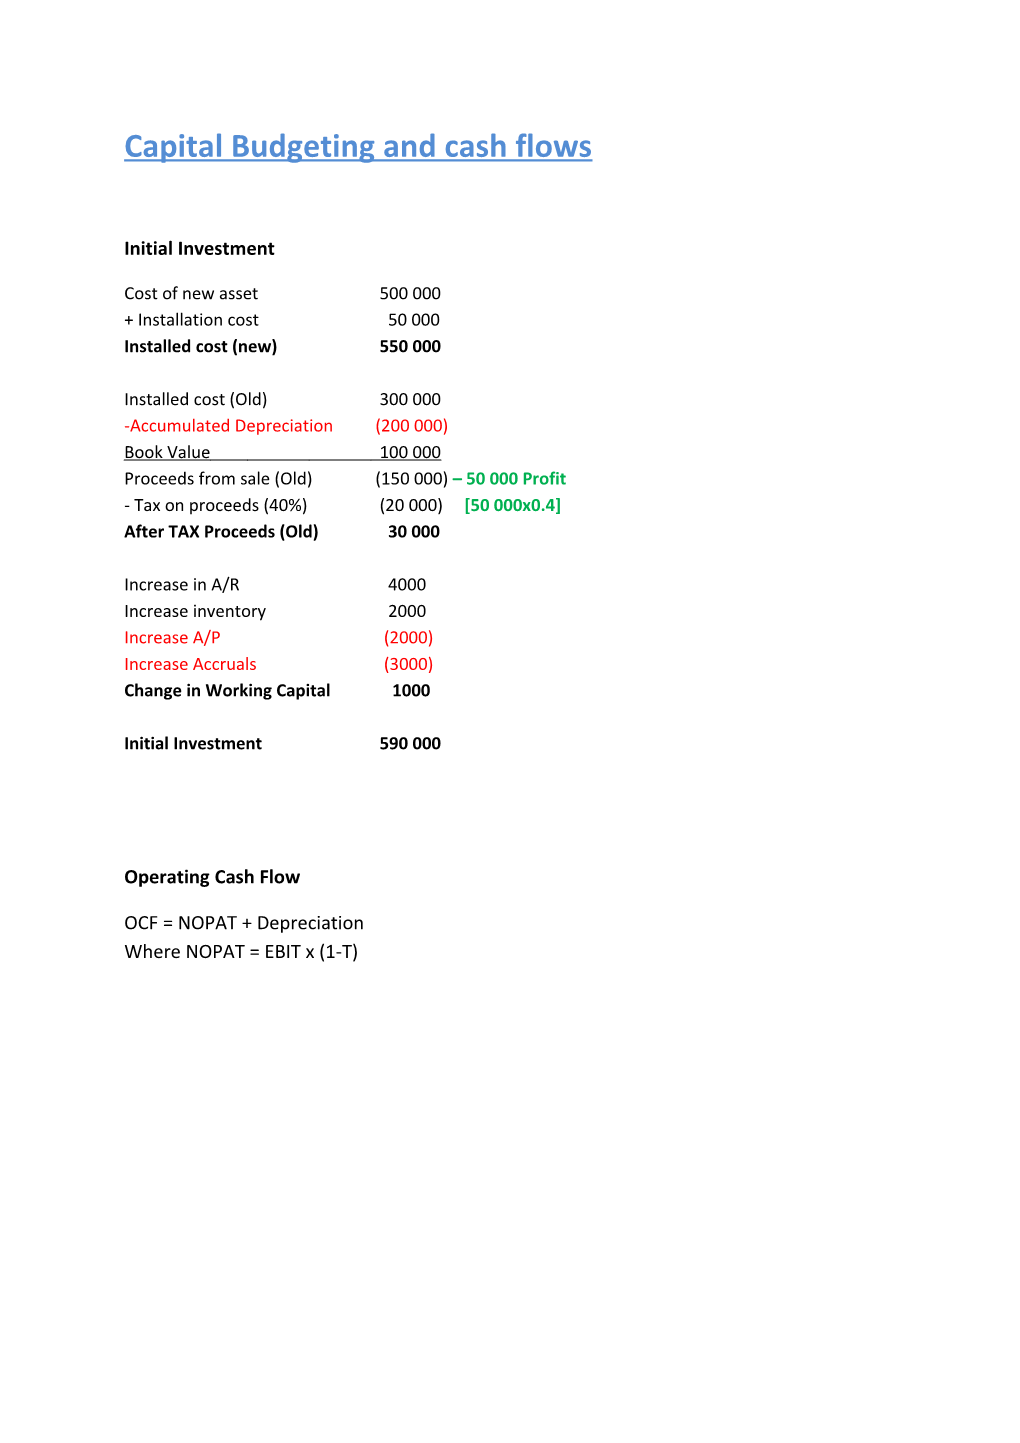 Capital Budgeting and Cash Flows